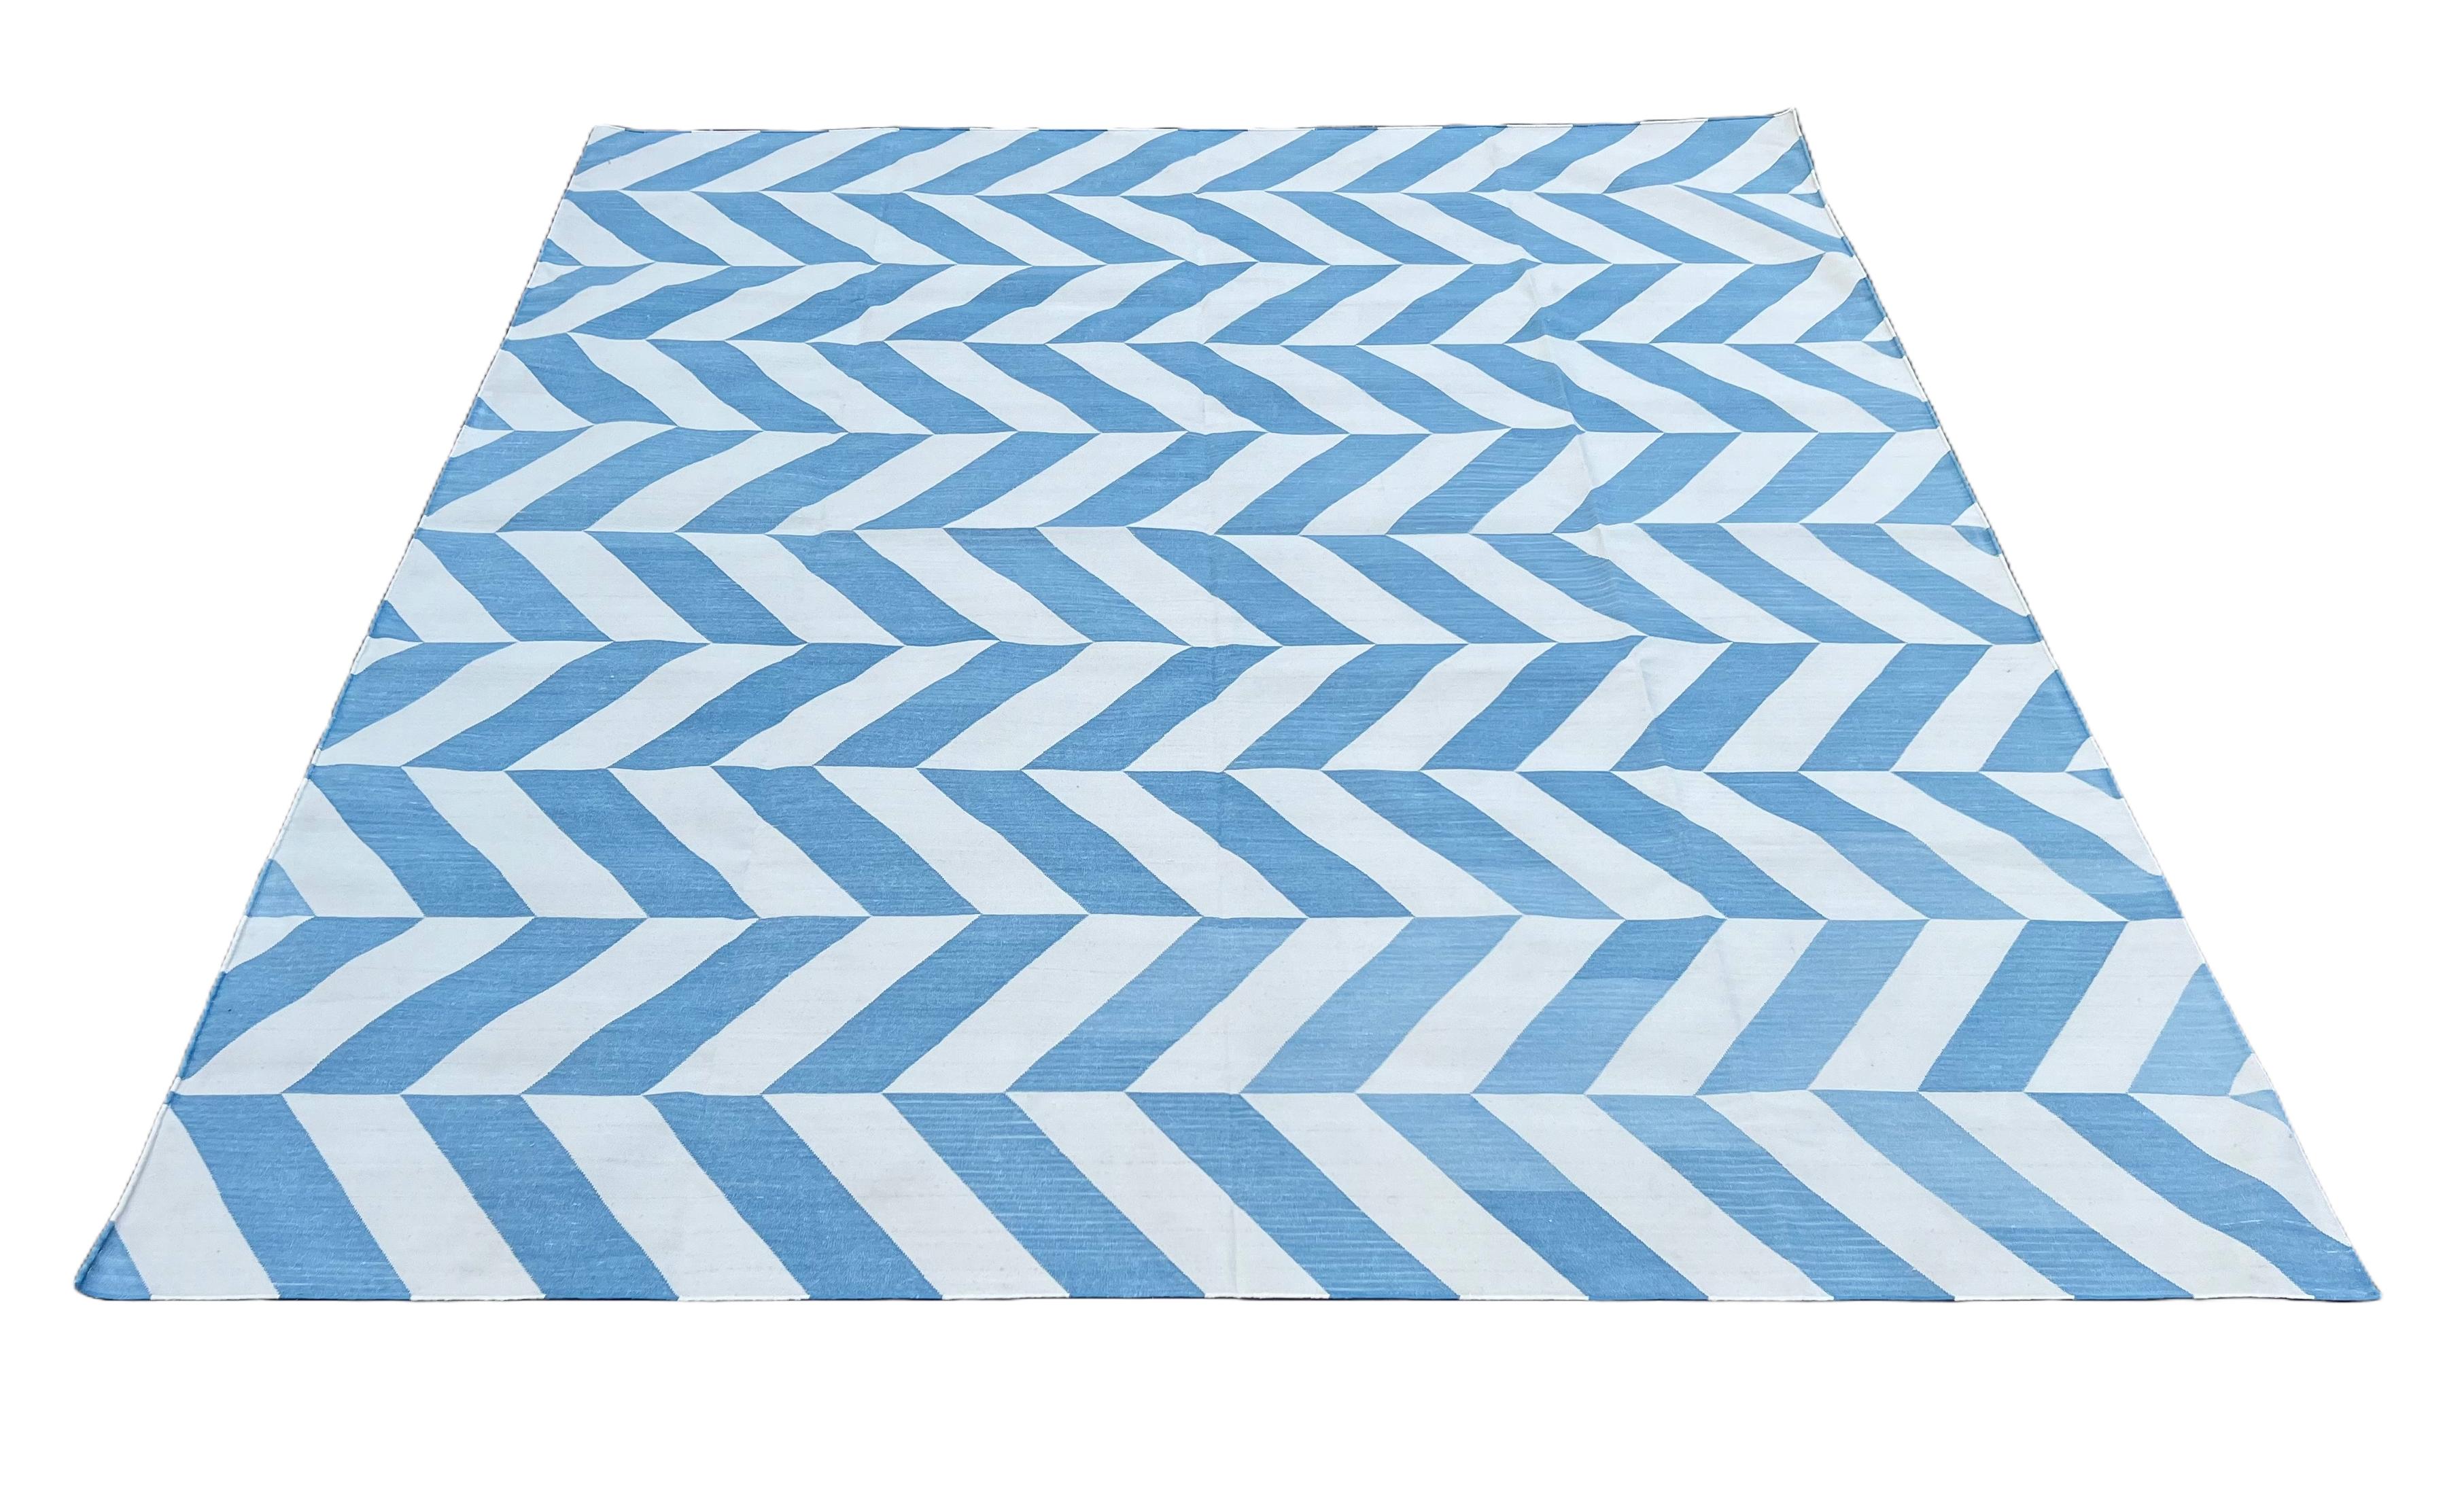 Handmade Cotton Area Flat Weave Rug, Sky Blue And White Zig Zag Striped Dhurrie For Sale 3